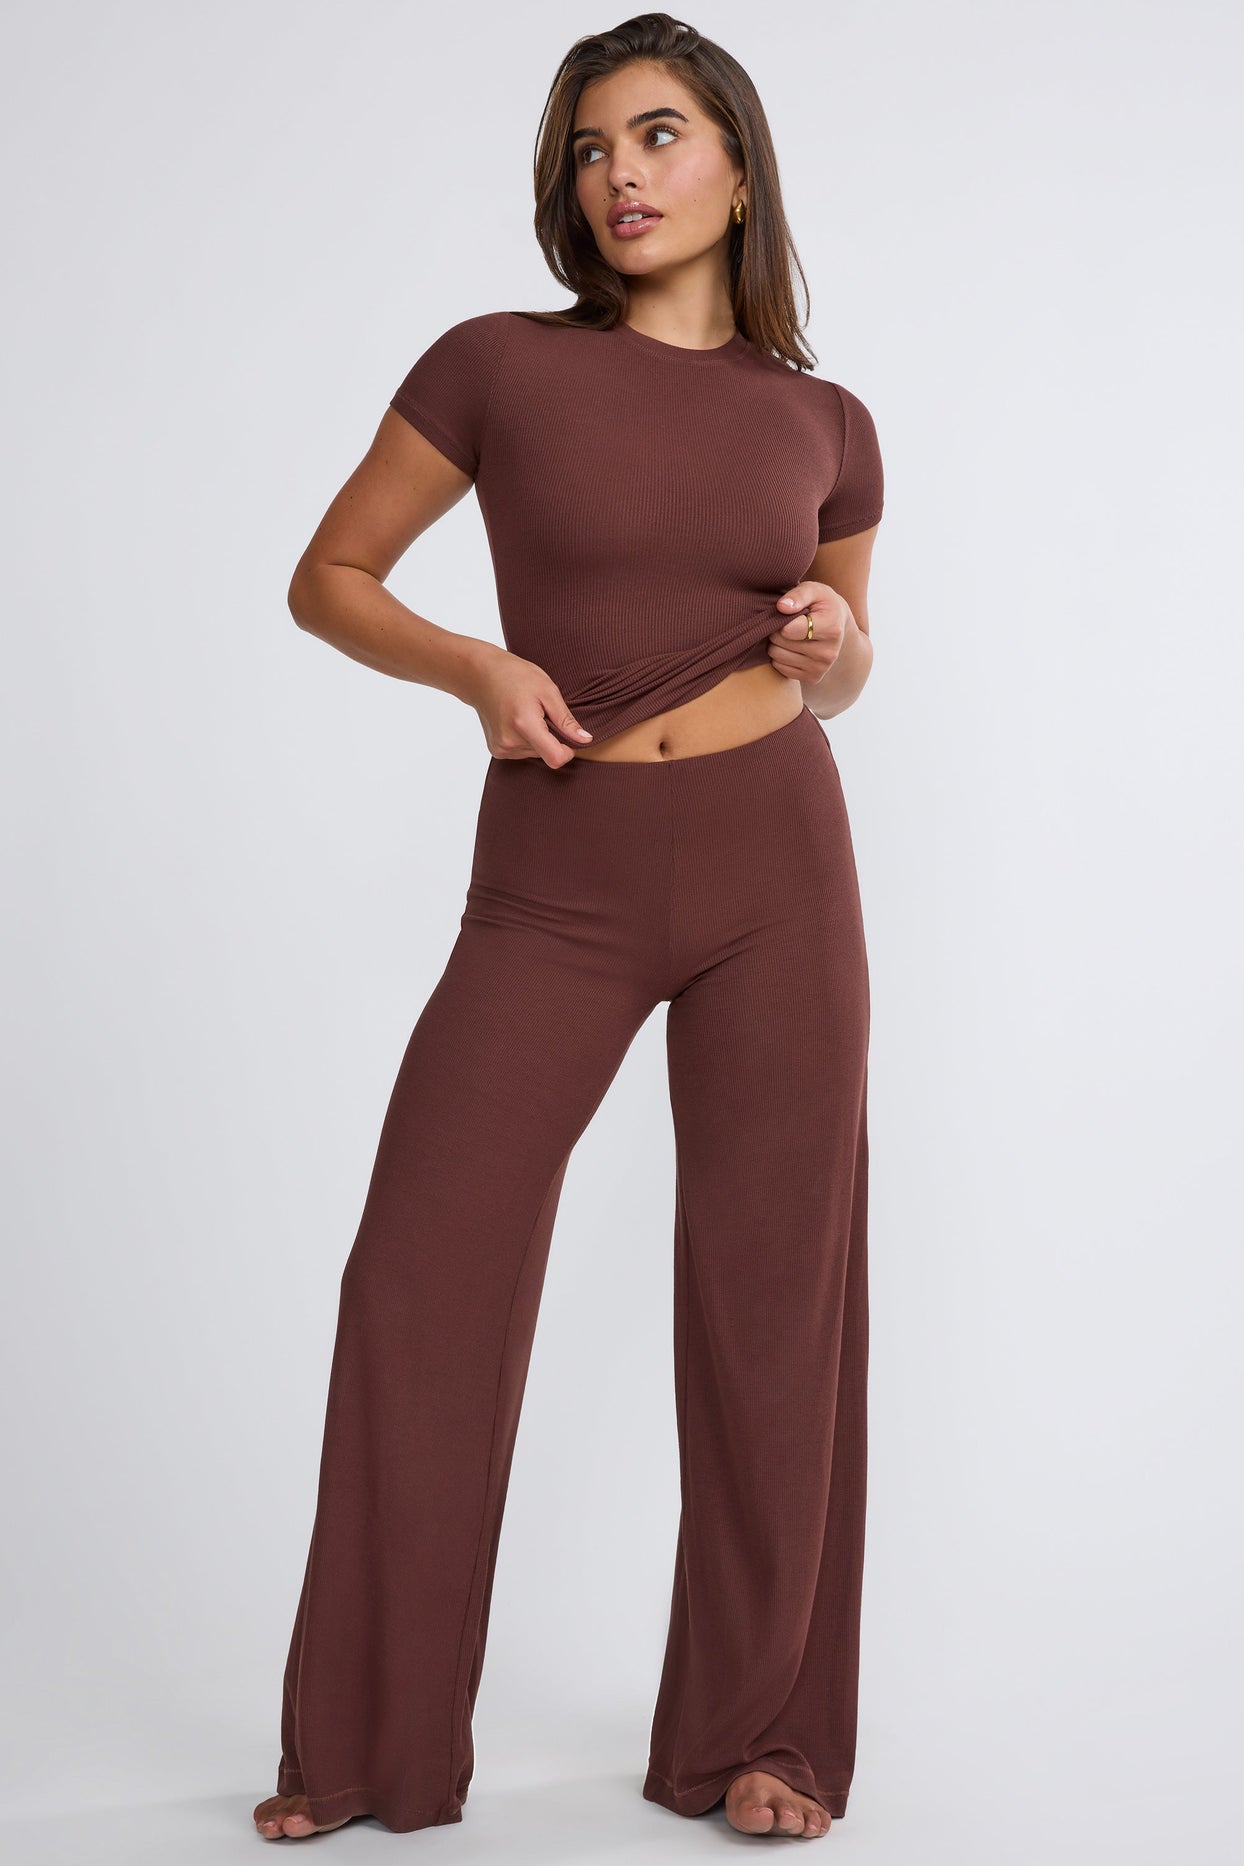 Petite Mid Rise Wide Leg Trouser in Chocolate